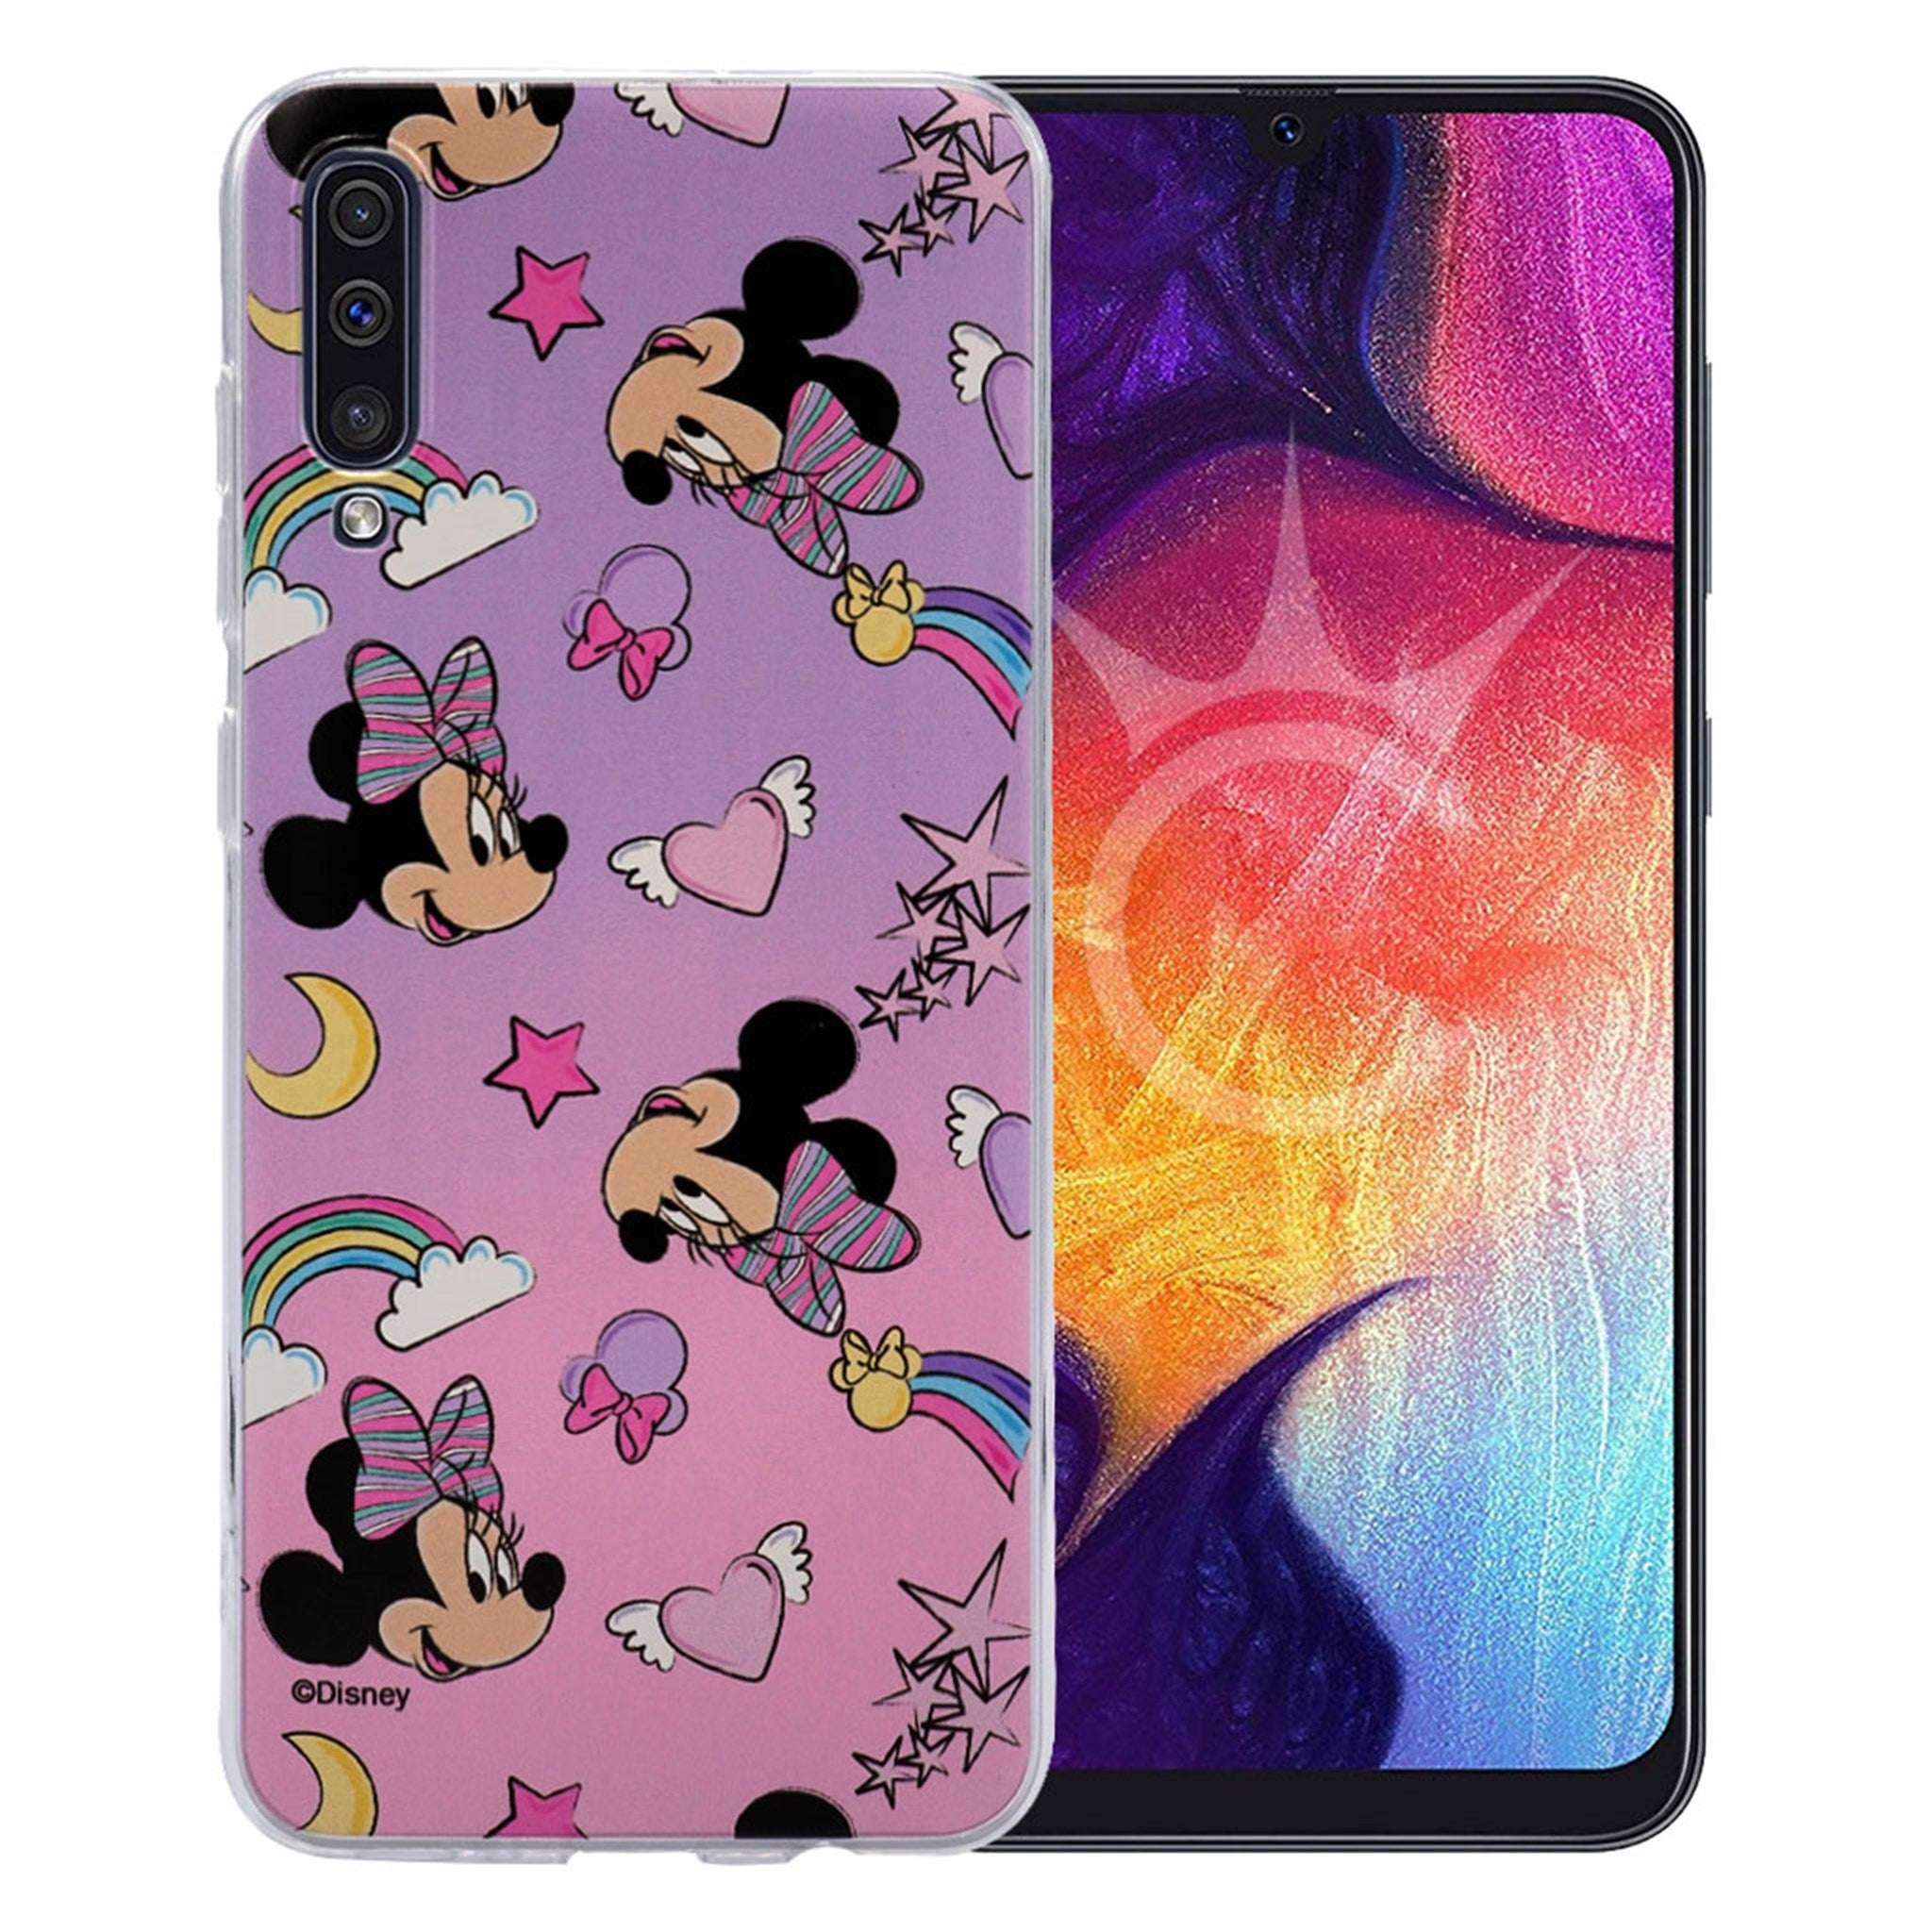 Minnie Mouse #31 Disney cover for Samsung Galaxy A70 - Multicolor